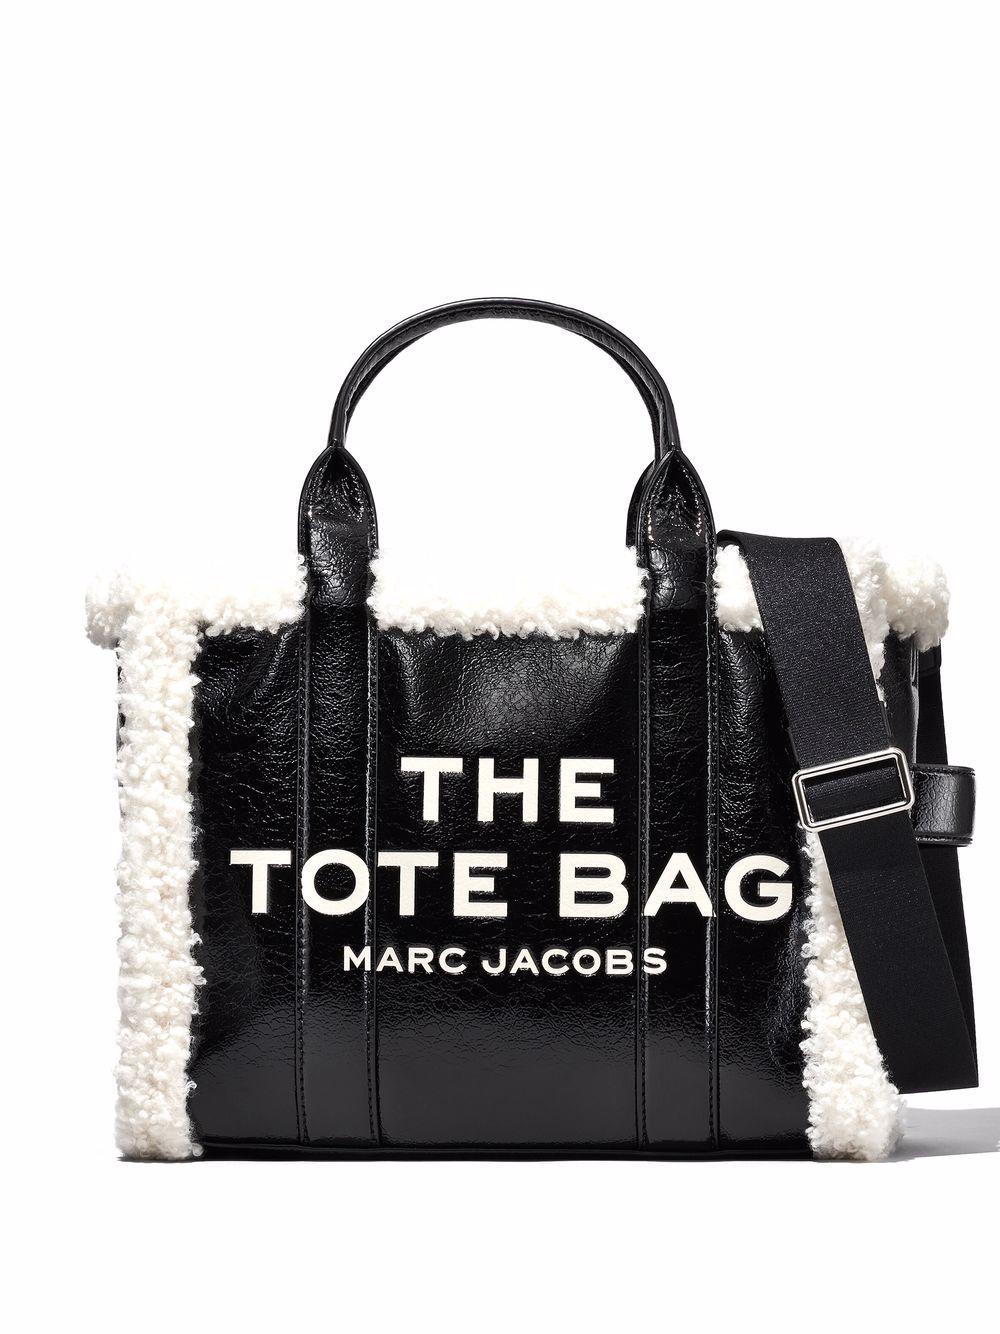 Marc Jacobs The Large Tote Crinkle Leather Tote Bag in Black/White (Black)  - Save 35% | Lyst